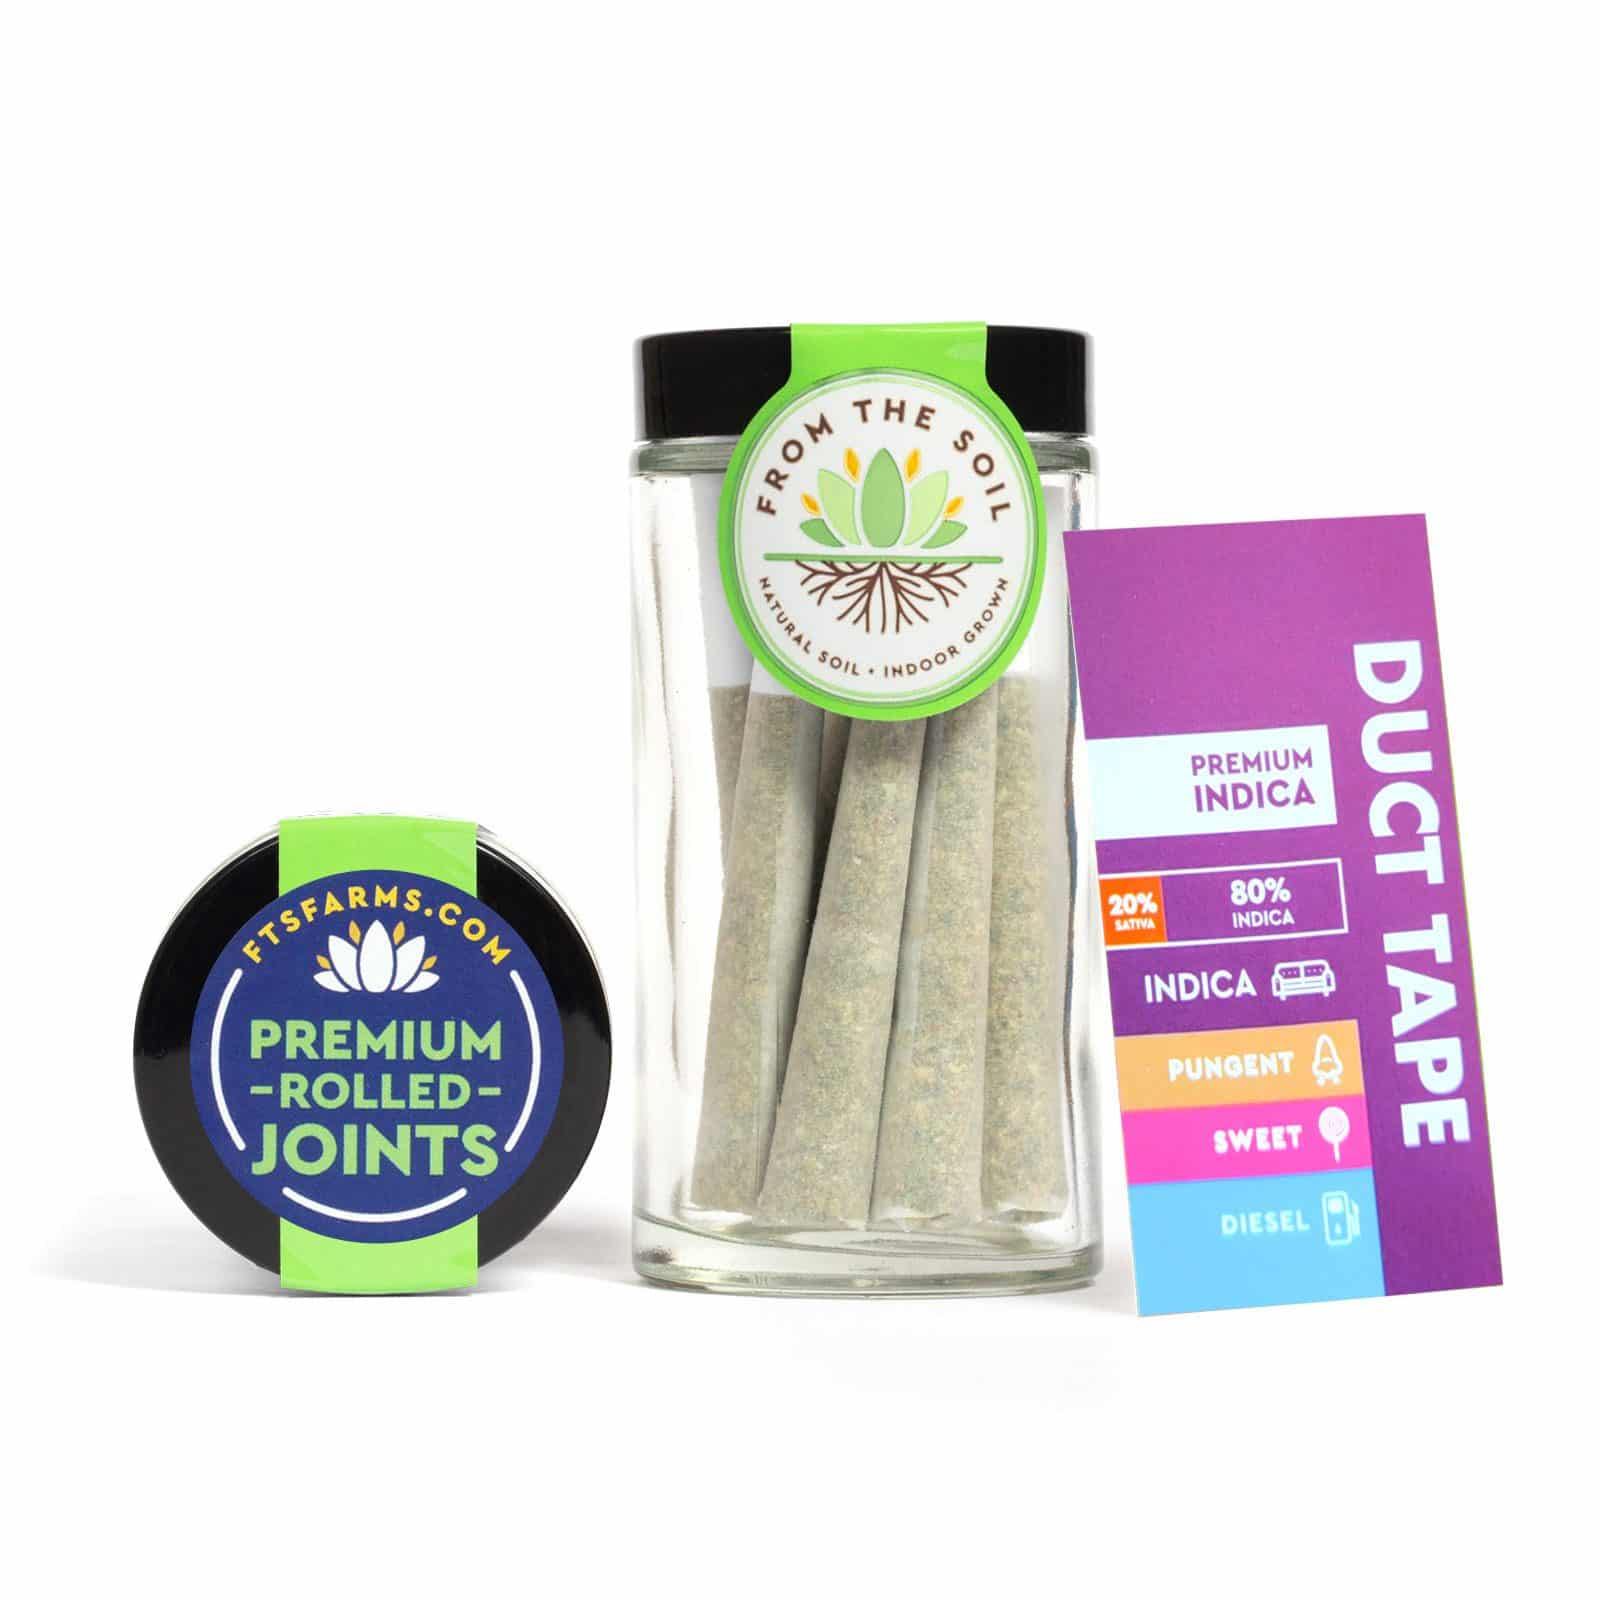 FTS Farms From the Soil Cannabis Pre-roll Joint Party Pack